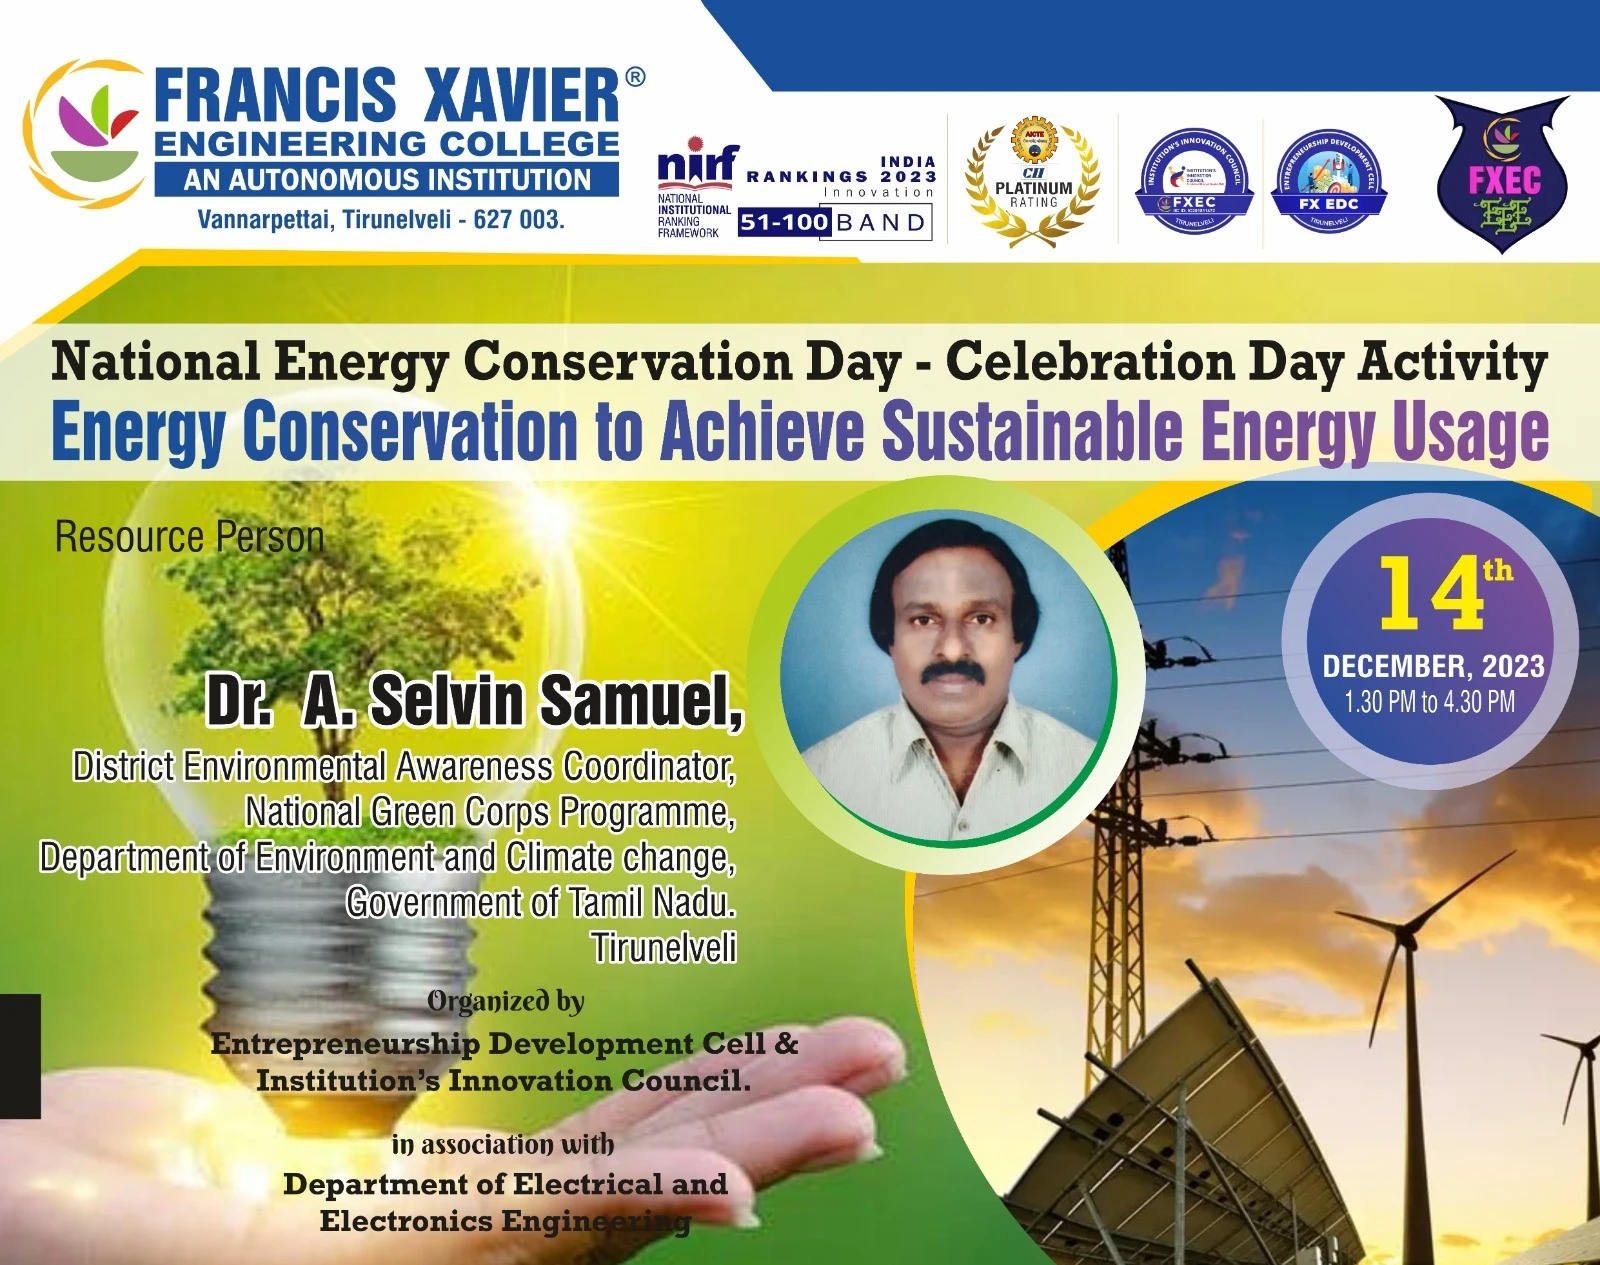 Energy Conservation to Achieve Sustainable Energy Usage